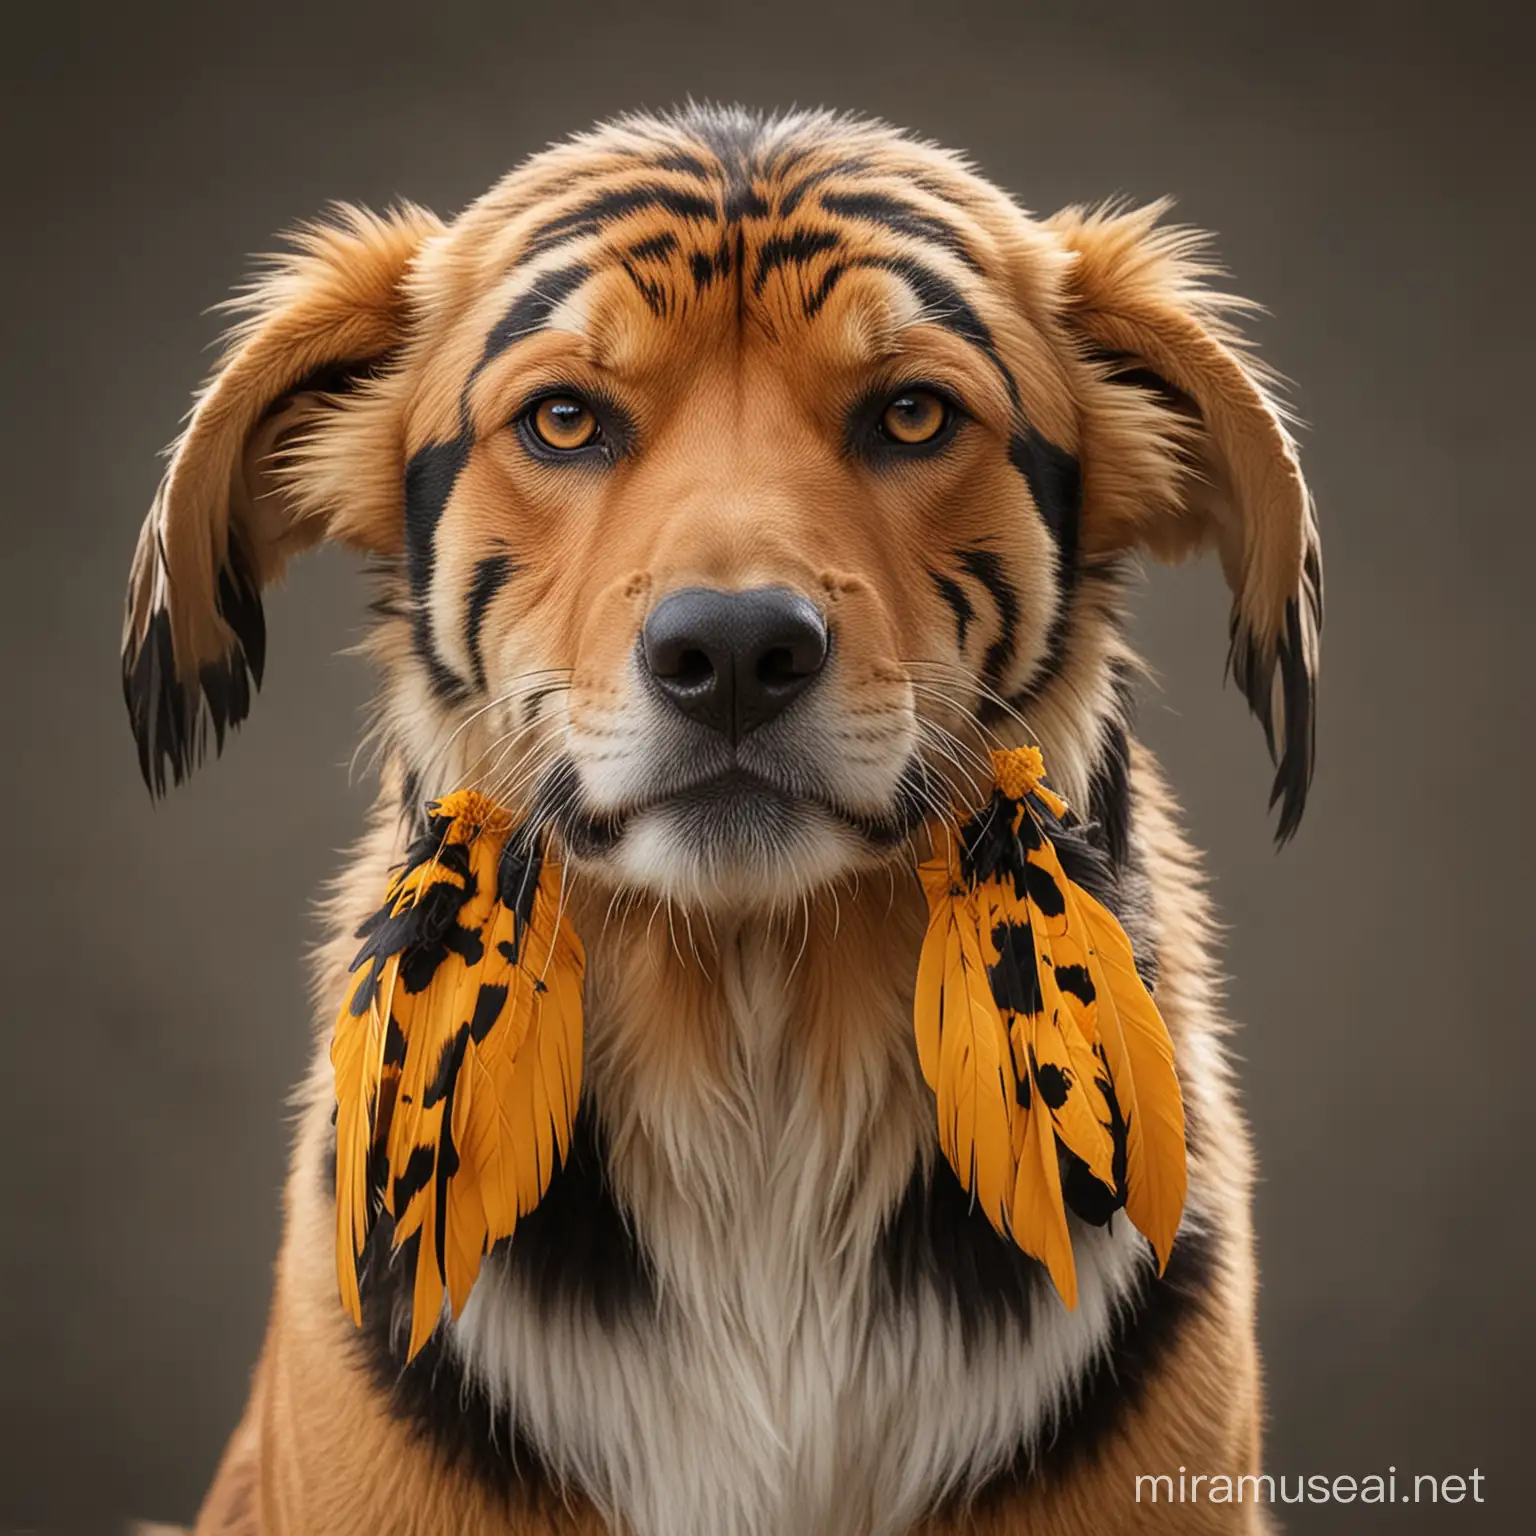 Wild Animals with Distinctive Features Eagle Beaks Tiger Stripes and Dog Ears